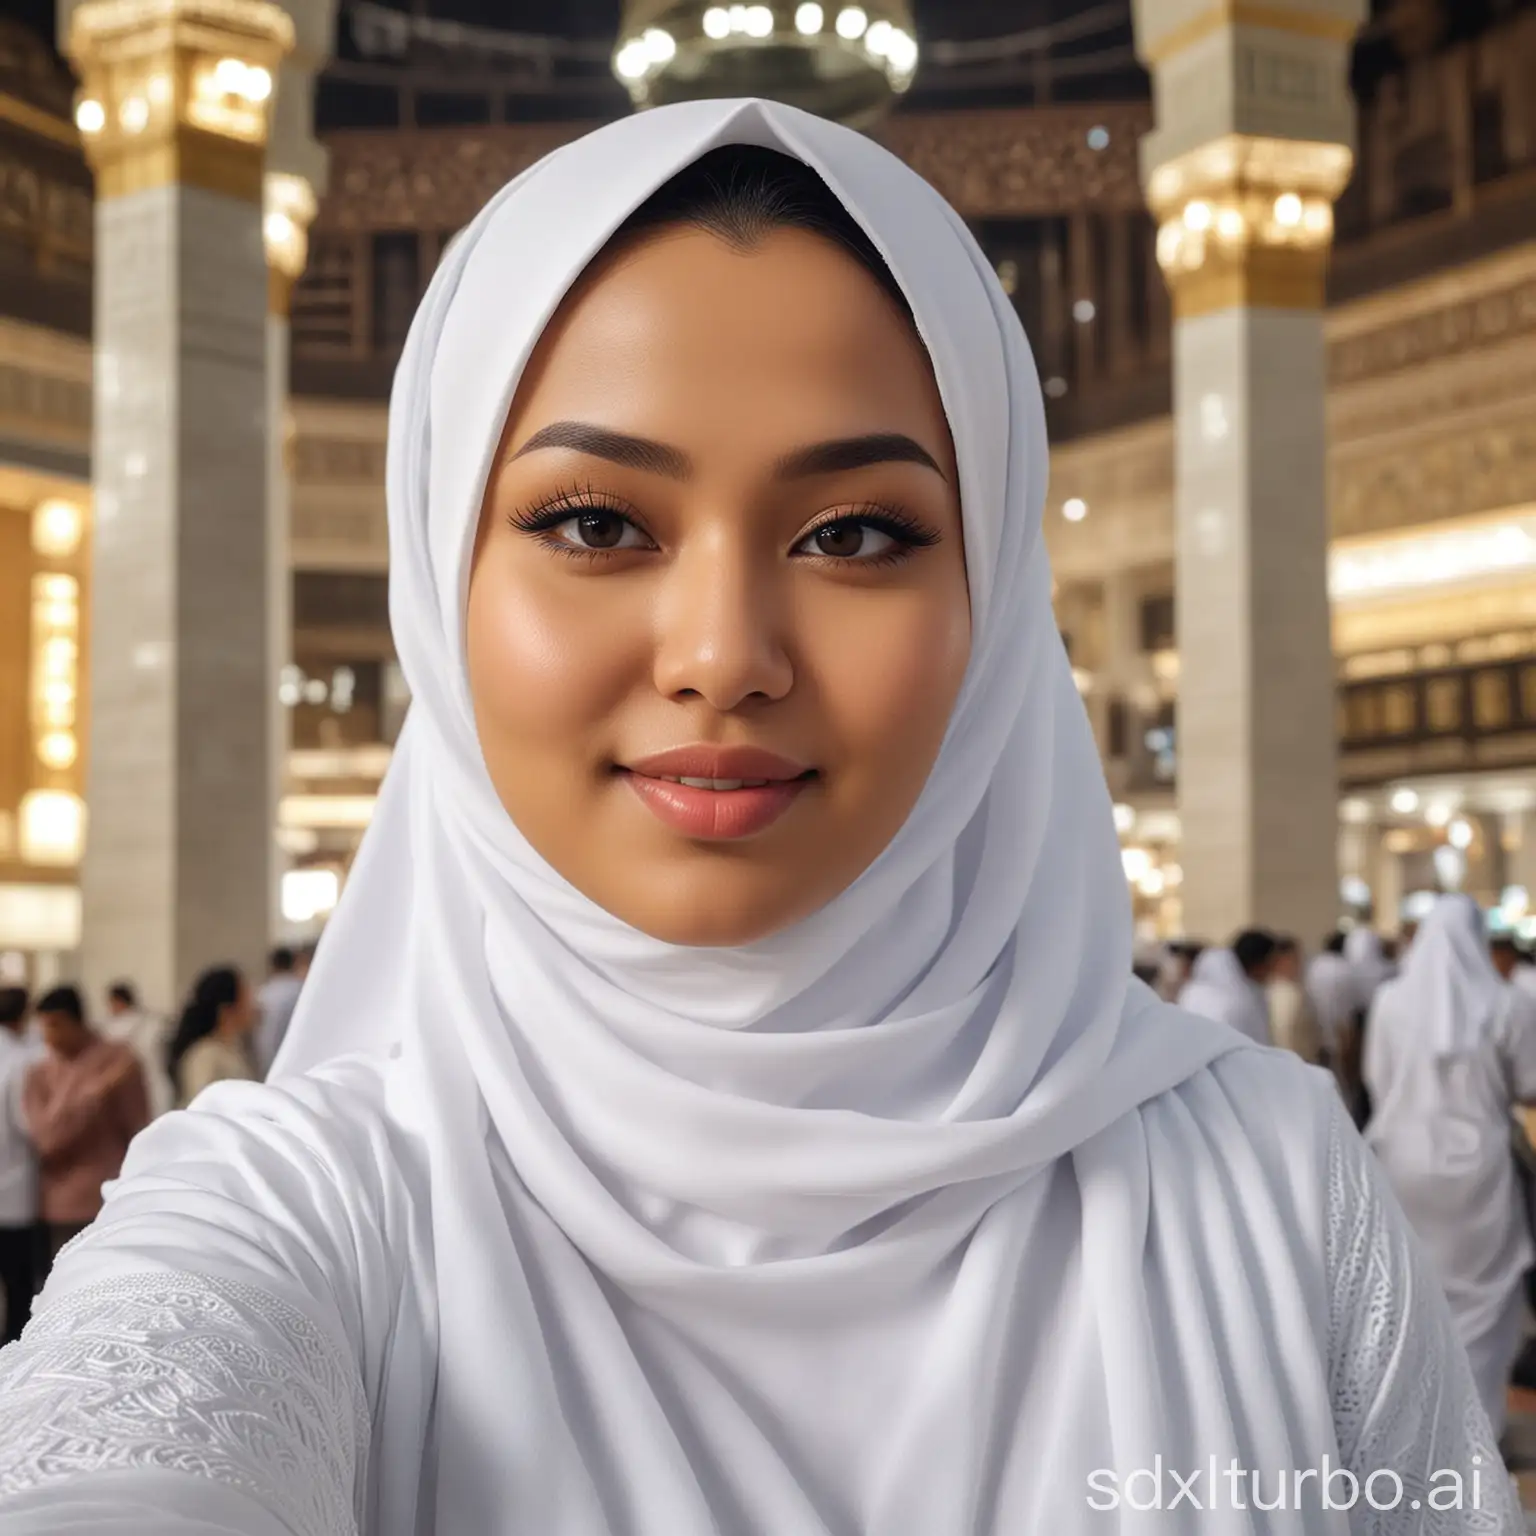 Chubby-Indonesian-Woman-in-White-Hijab-at-Kaaba-Umrah-Selfie-with-Selicca-Lens